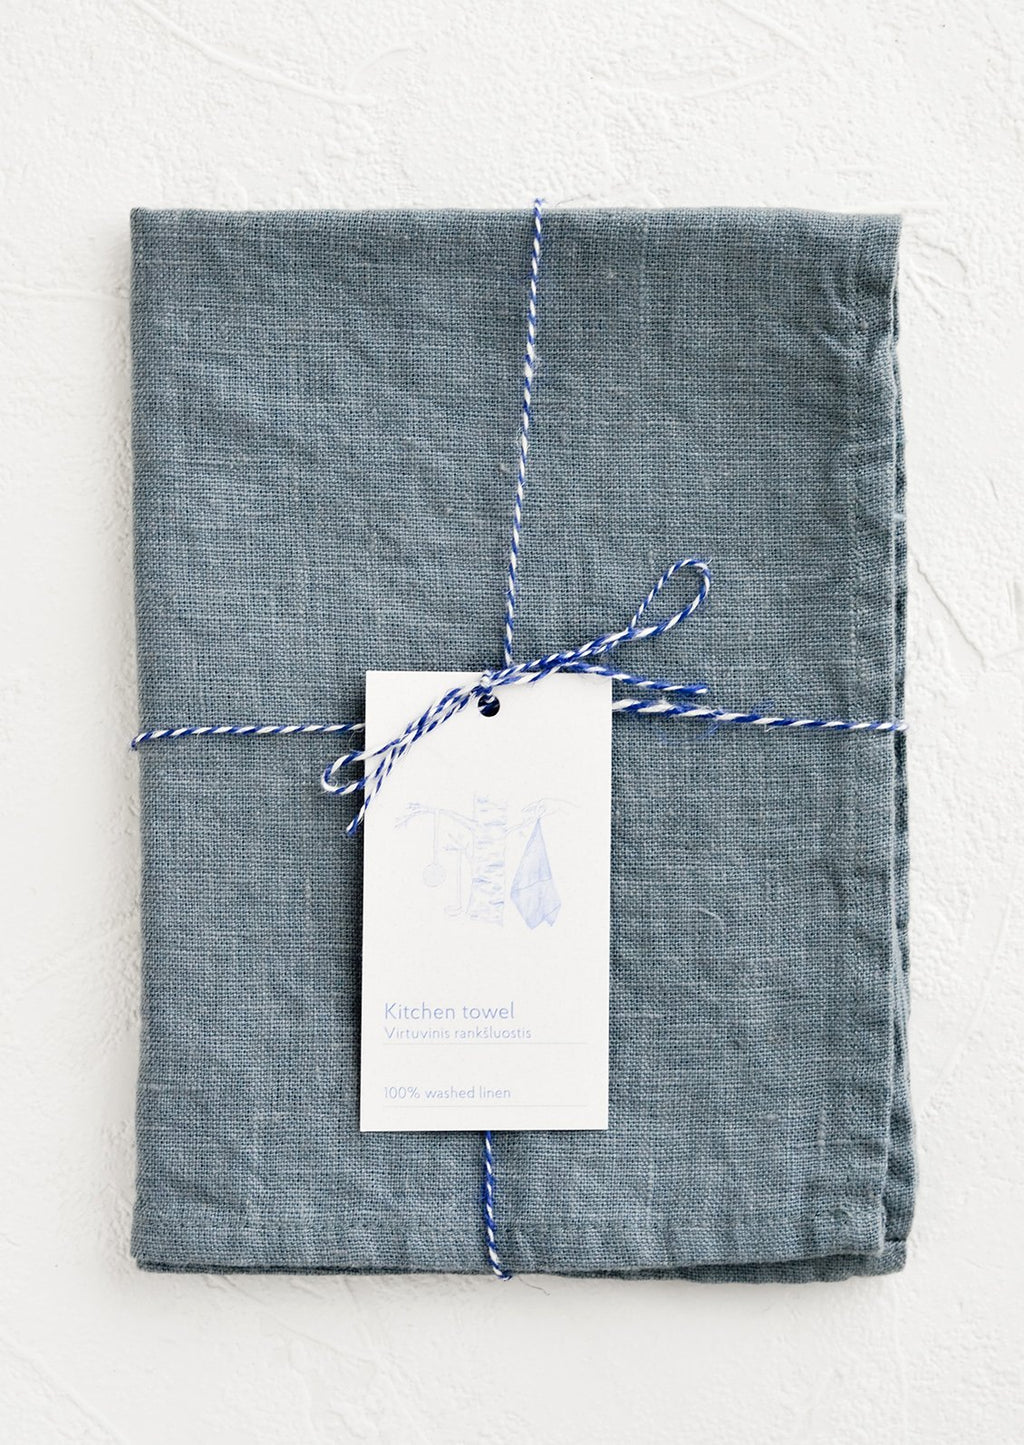 Blue Fog: A folded faded blue linen tea towel tied in baker's twine with a decorative hangtag